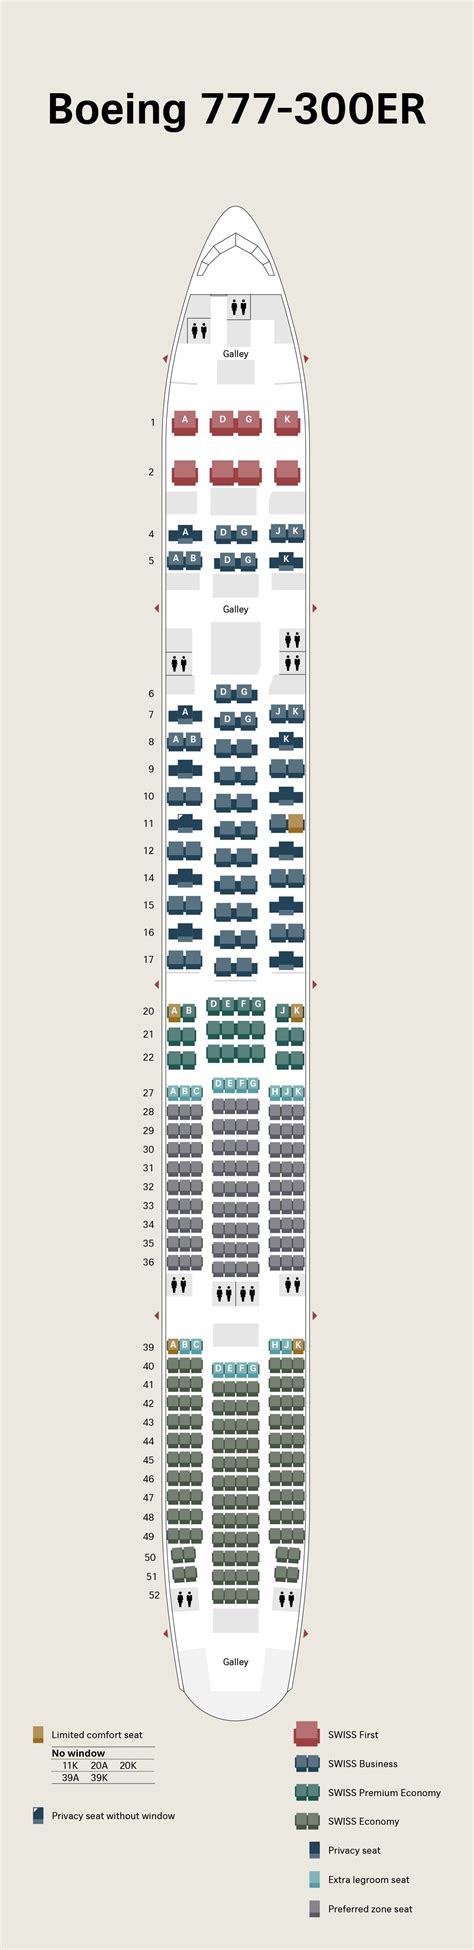 swiss airlines boeing  er seat map